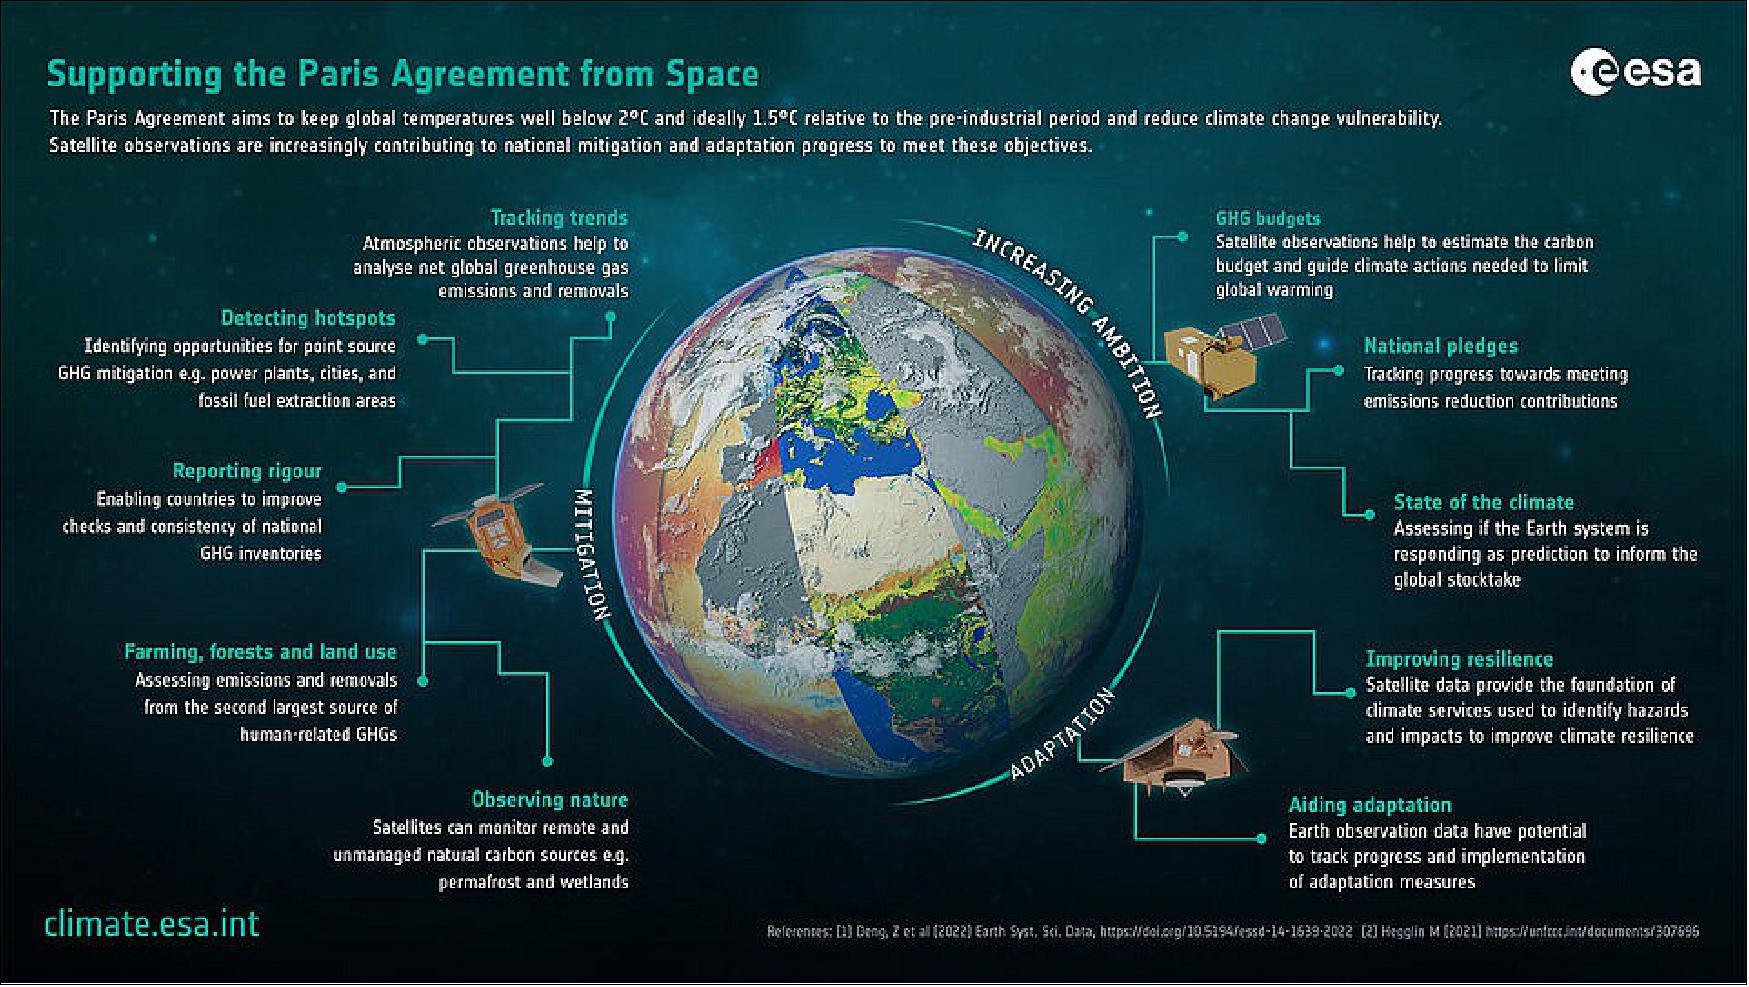 Figure 20: Supporting the Paris Agreement from Space. The Paris Agreement aims to keep global temperatures well below 2ºC and ideally 1.5ºC relative to the pre-industrial period and reduce climate change vulnerability. Satellite observations are increasingly contributing to national mitigation and adaptation progress to meet these objectives (image credit: ESA)